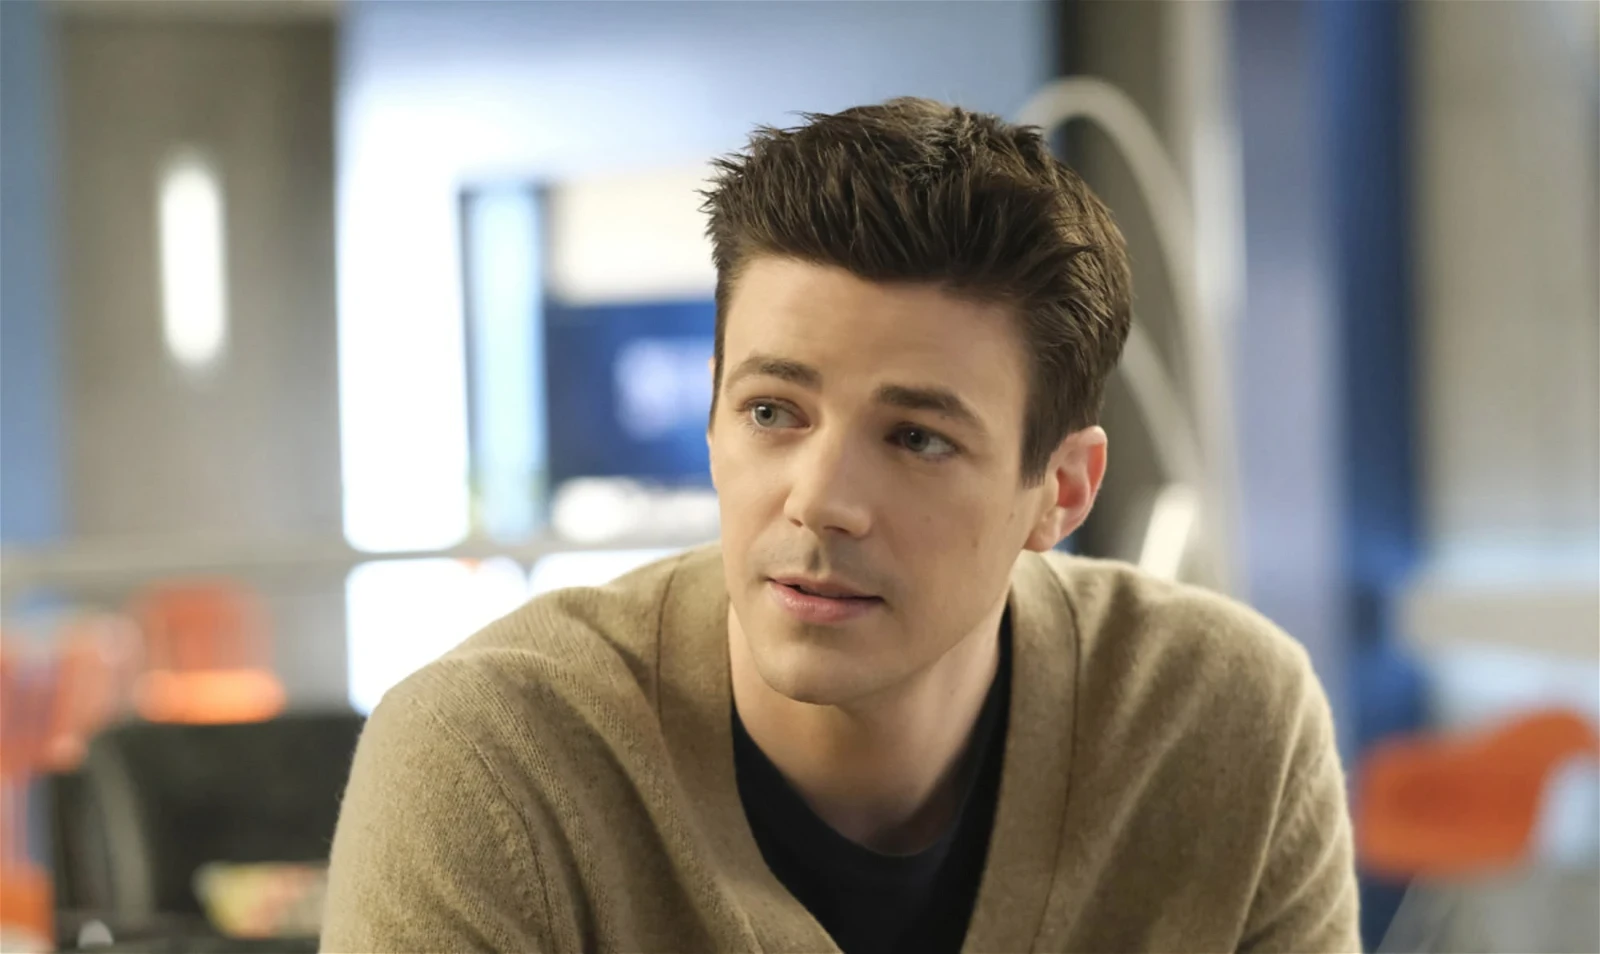 Grant Gustin as Barry Allen in The CW show The Flash